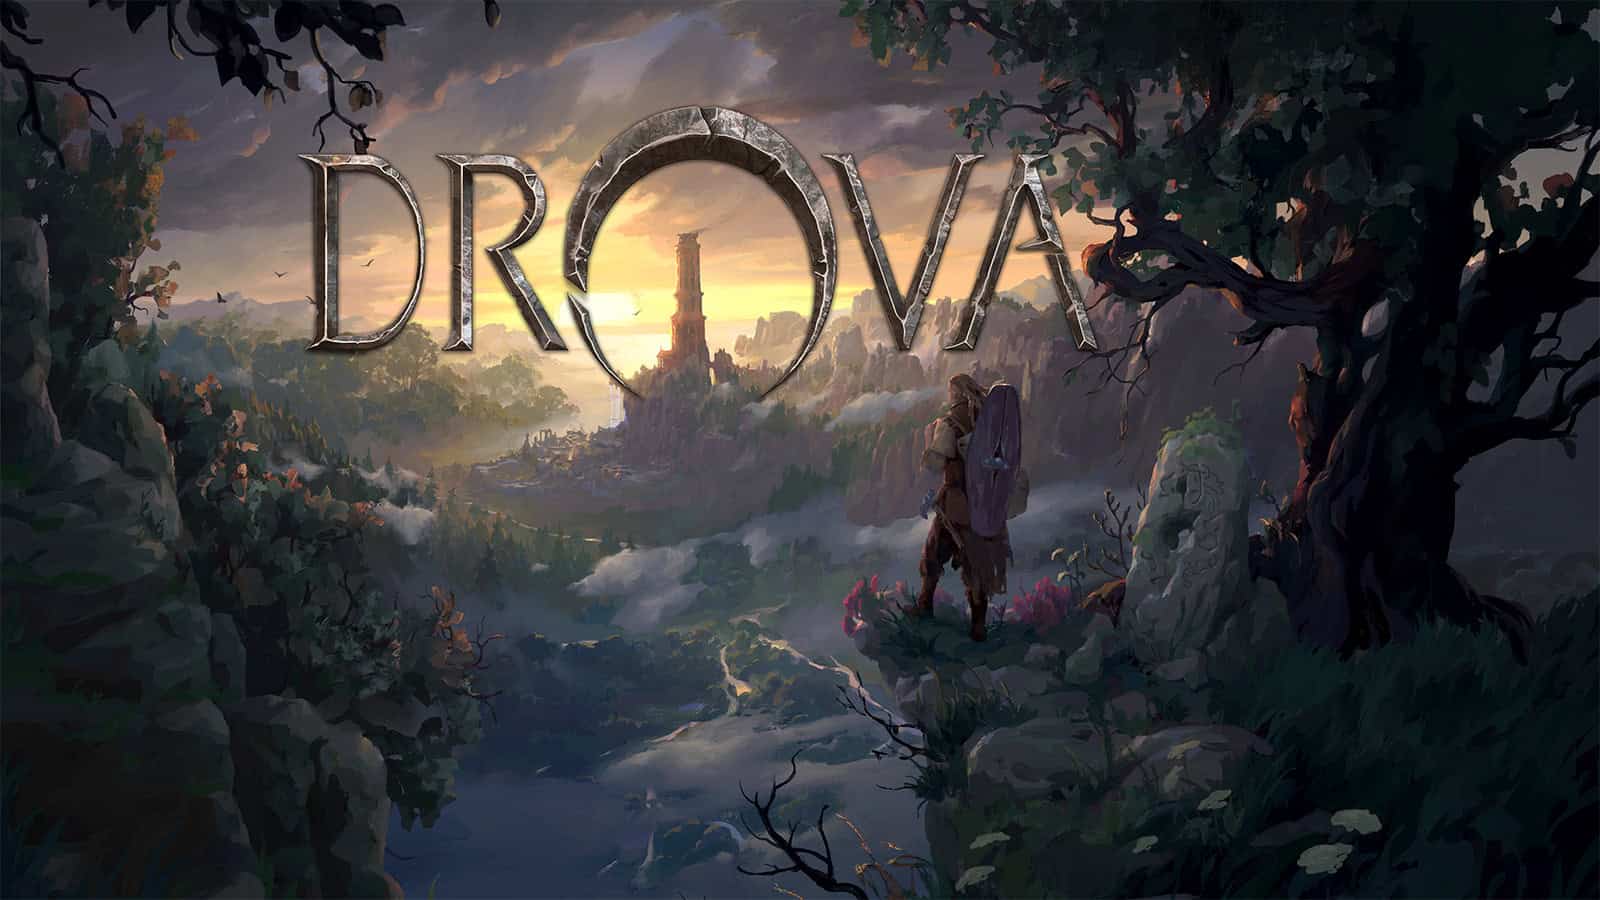 The official artwork for Drova - Forsaken Kin showing the player character in what looks like a lush open world